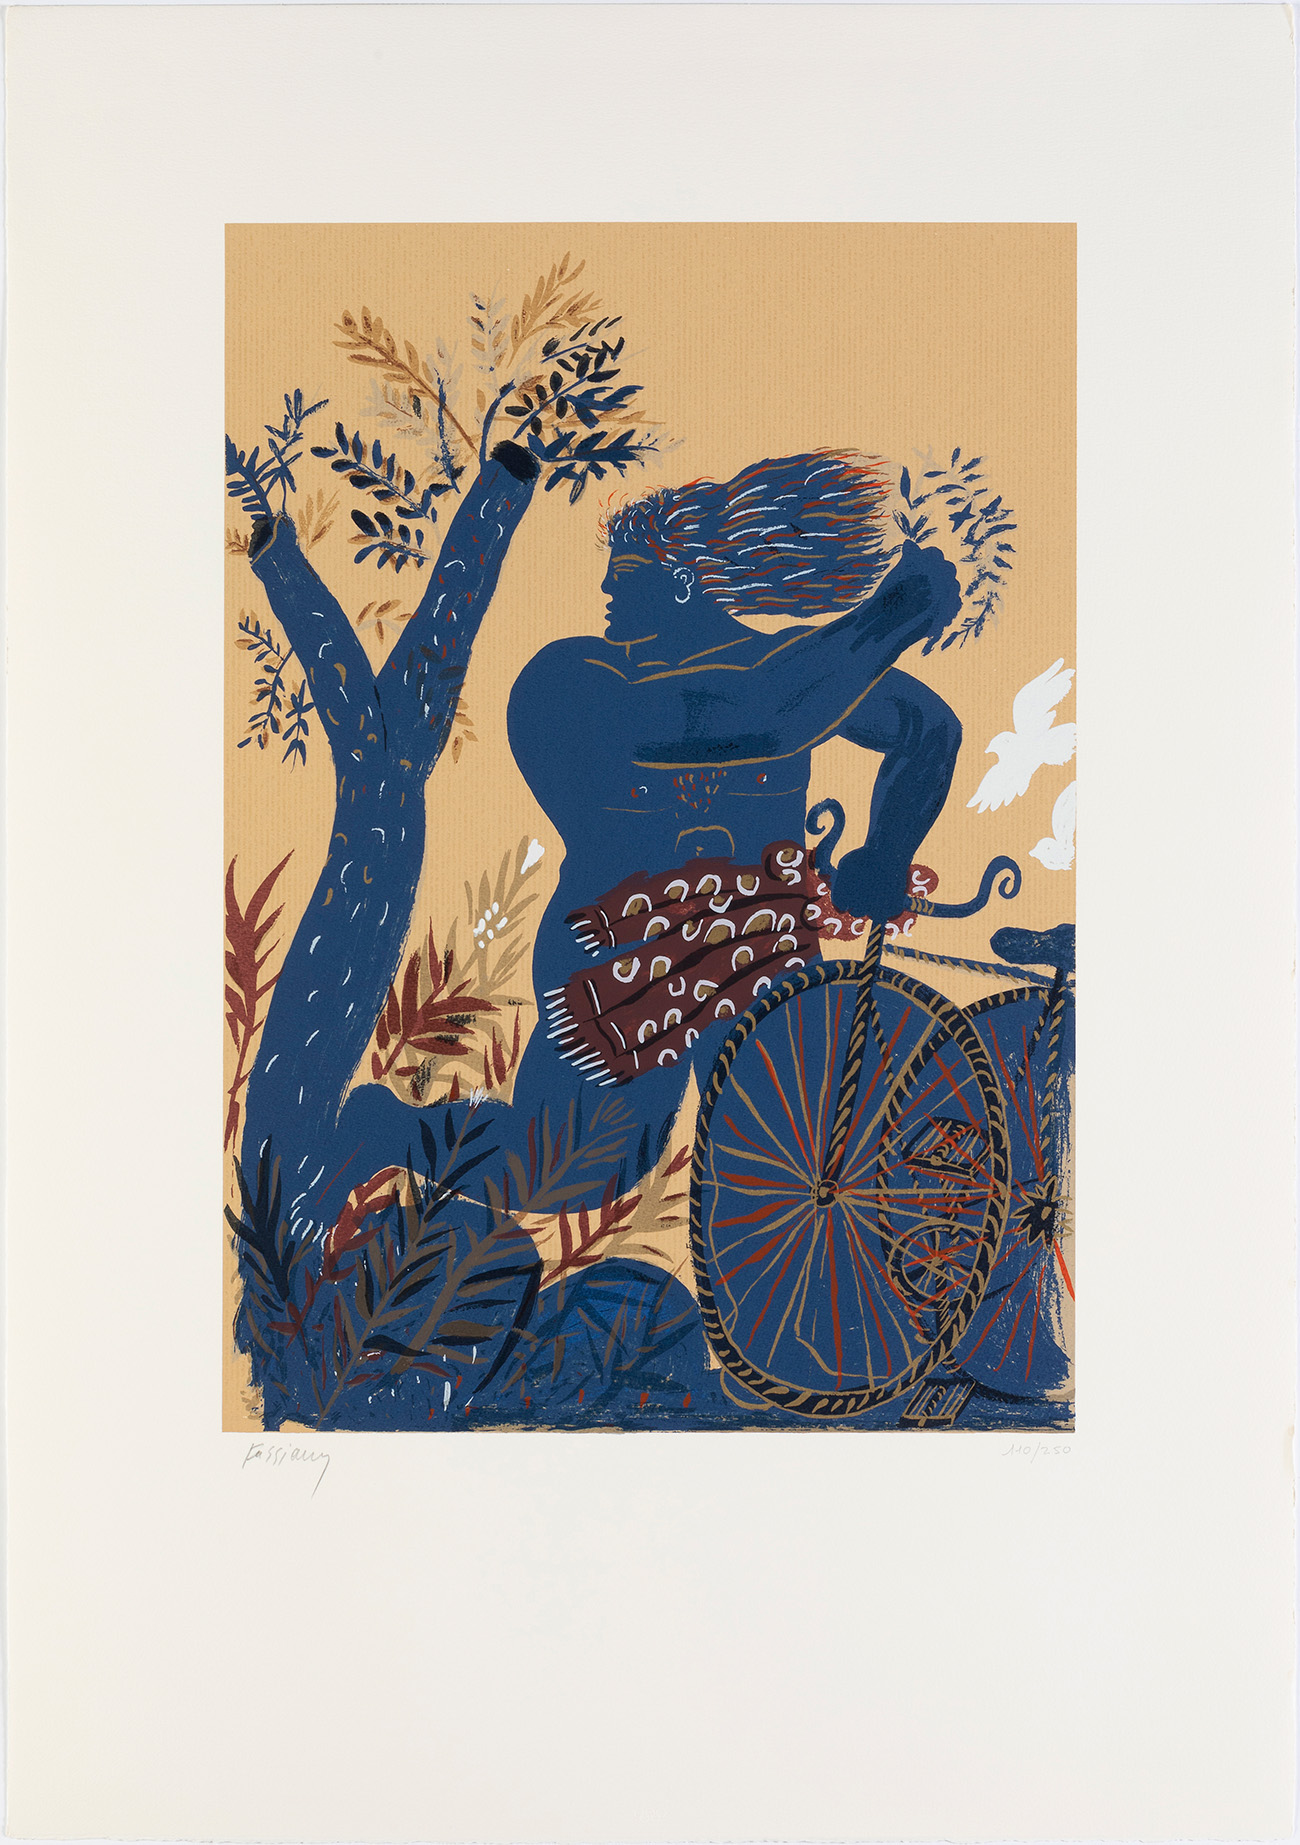 ALEKOS FASSIANOS (Greece, 1935).Untitled, 1992, from the "Suite Olympic Centennial".Silkscreen on